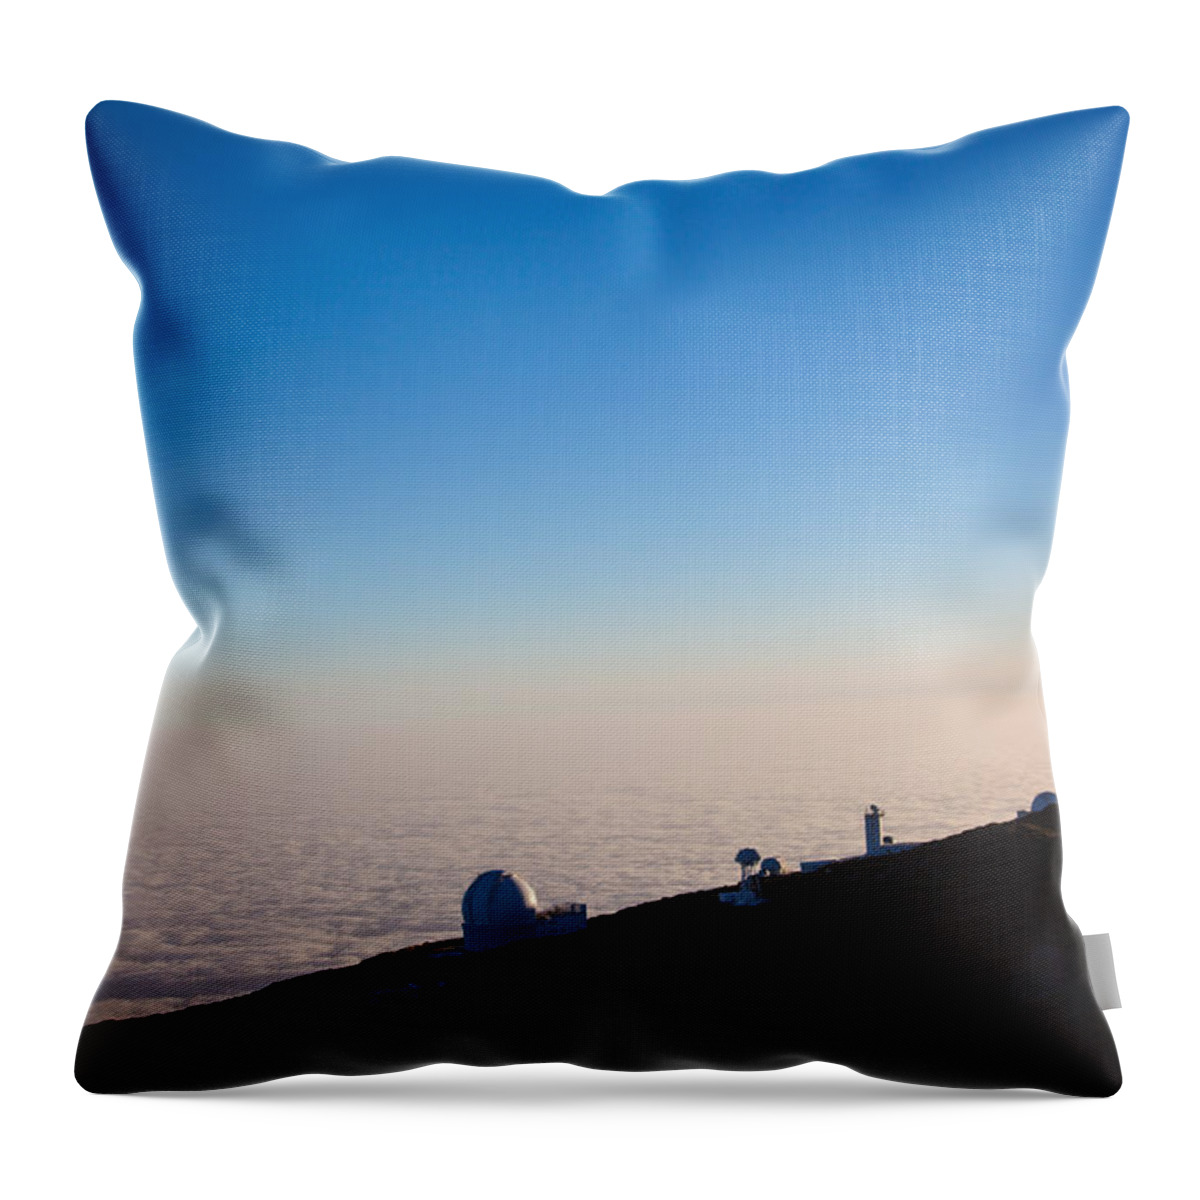  La Palma Throw Pillow featuring the photograph Observer by Ralf Kaiser